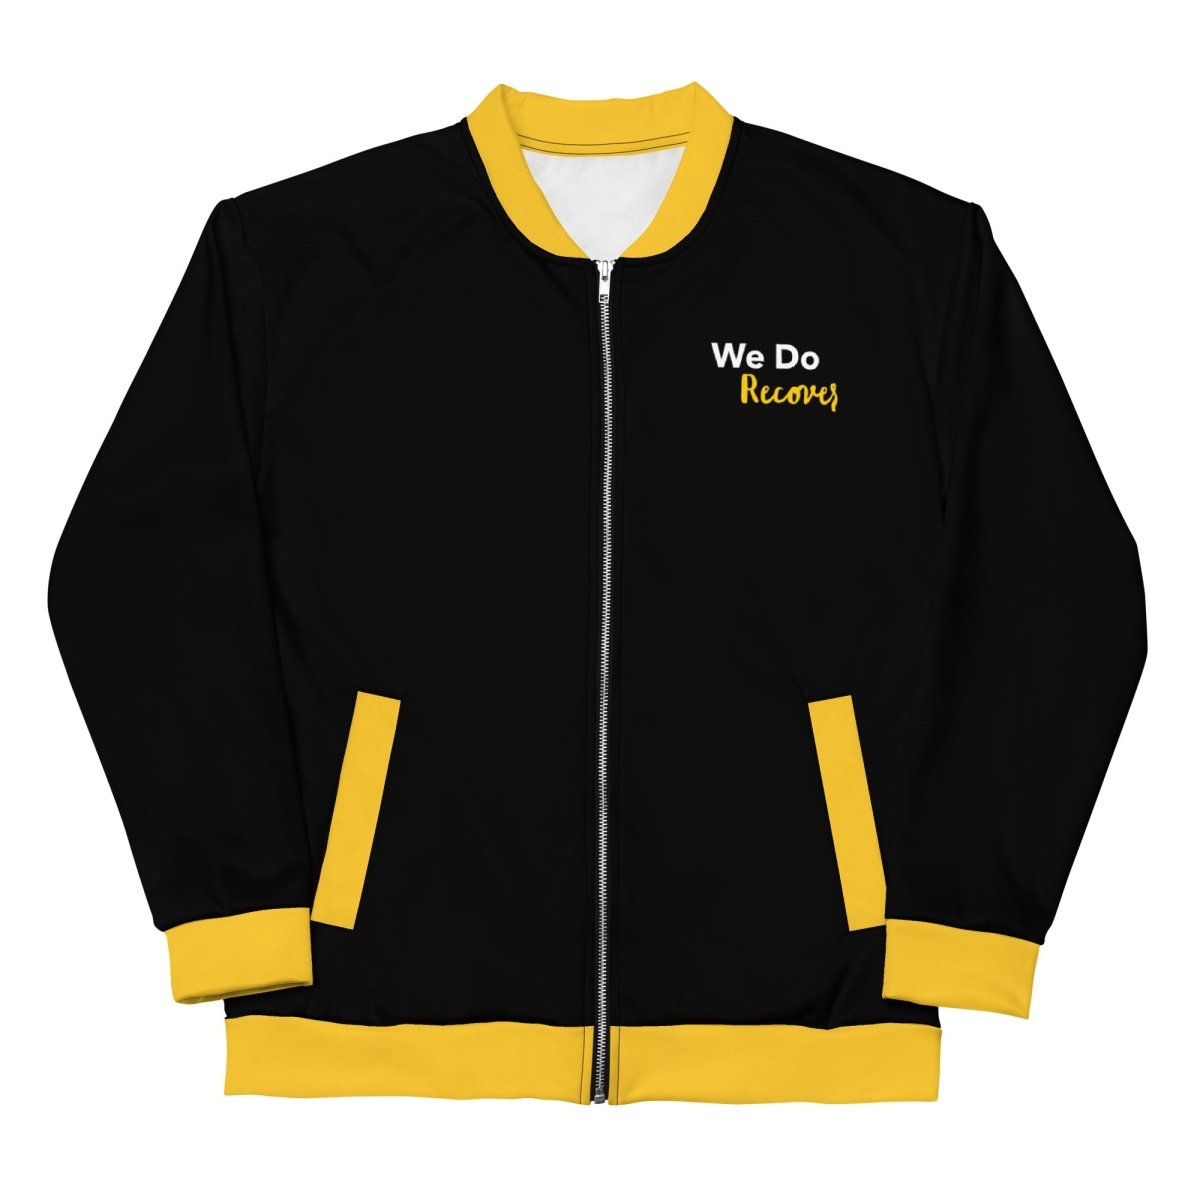 "We Do Recover" Varsity-Style Bomber Jacket: Celebrating Recovery with Pride - XS | Sobervation